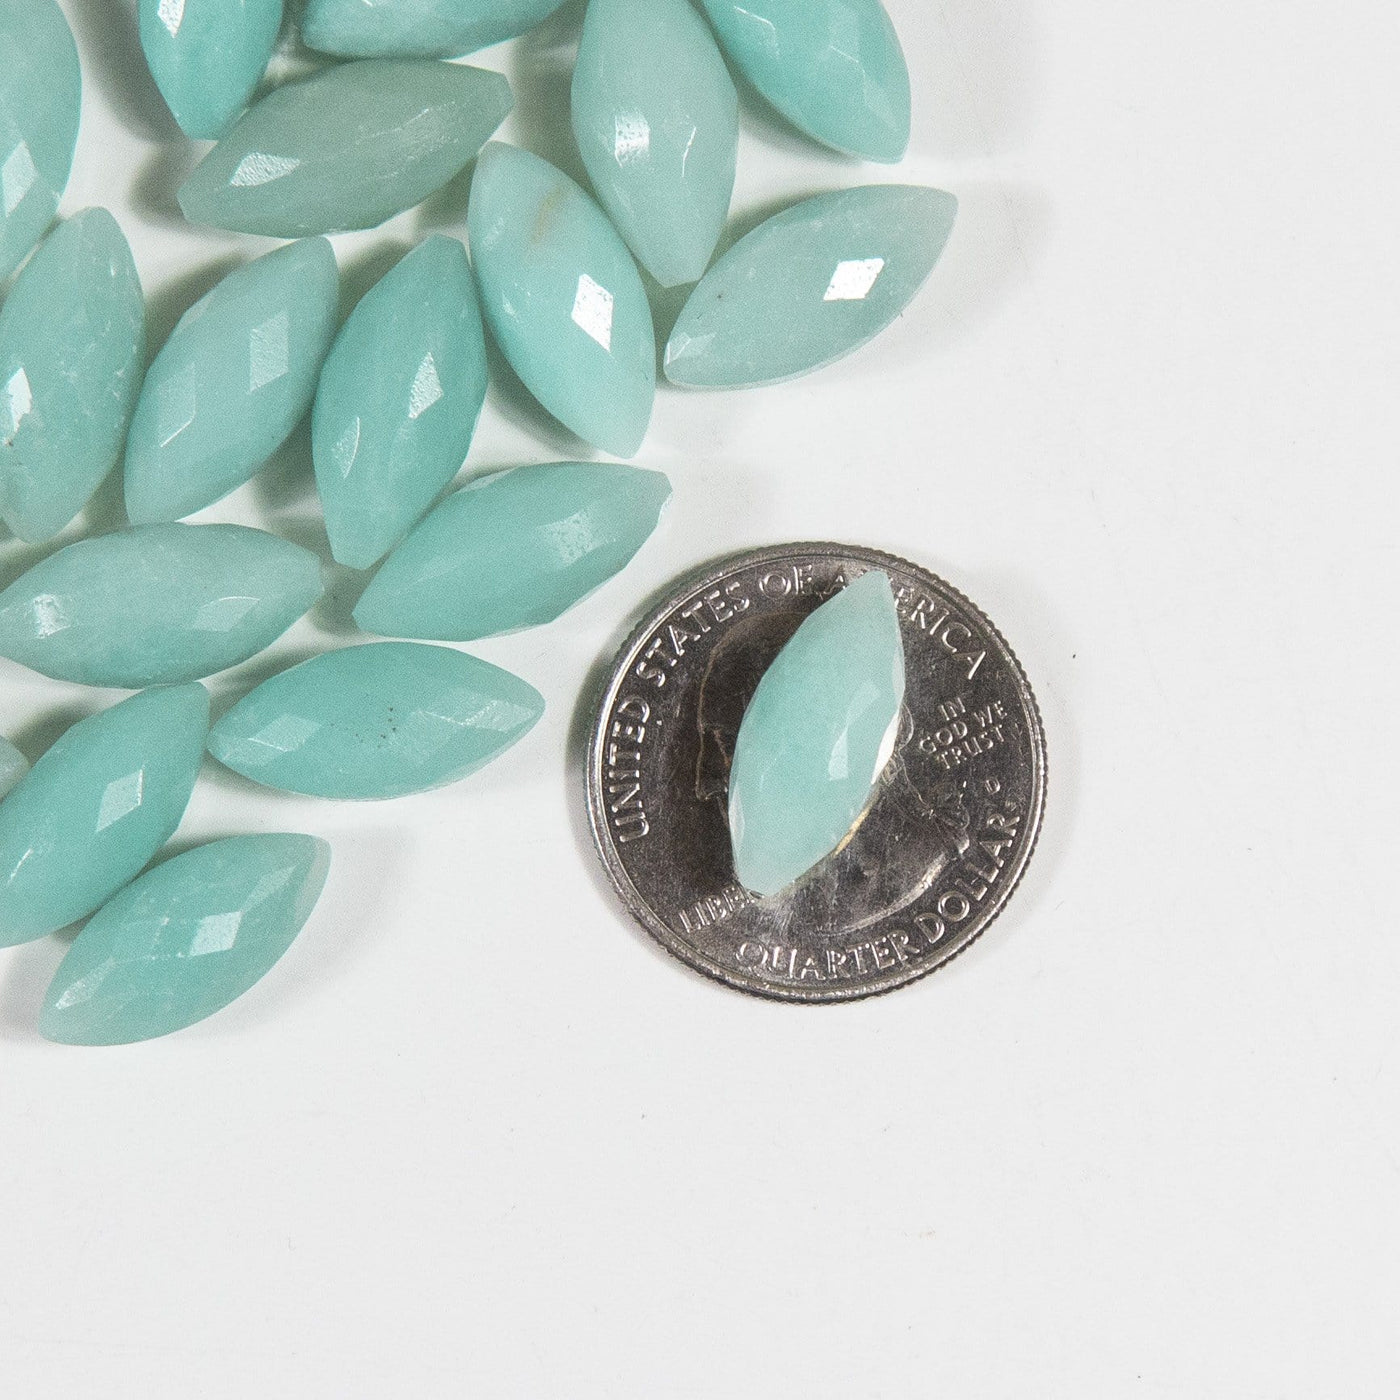 Picture of amazonite facted cabochon on top of a quarter for size reference. 